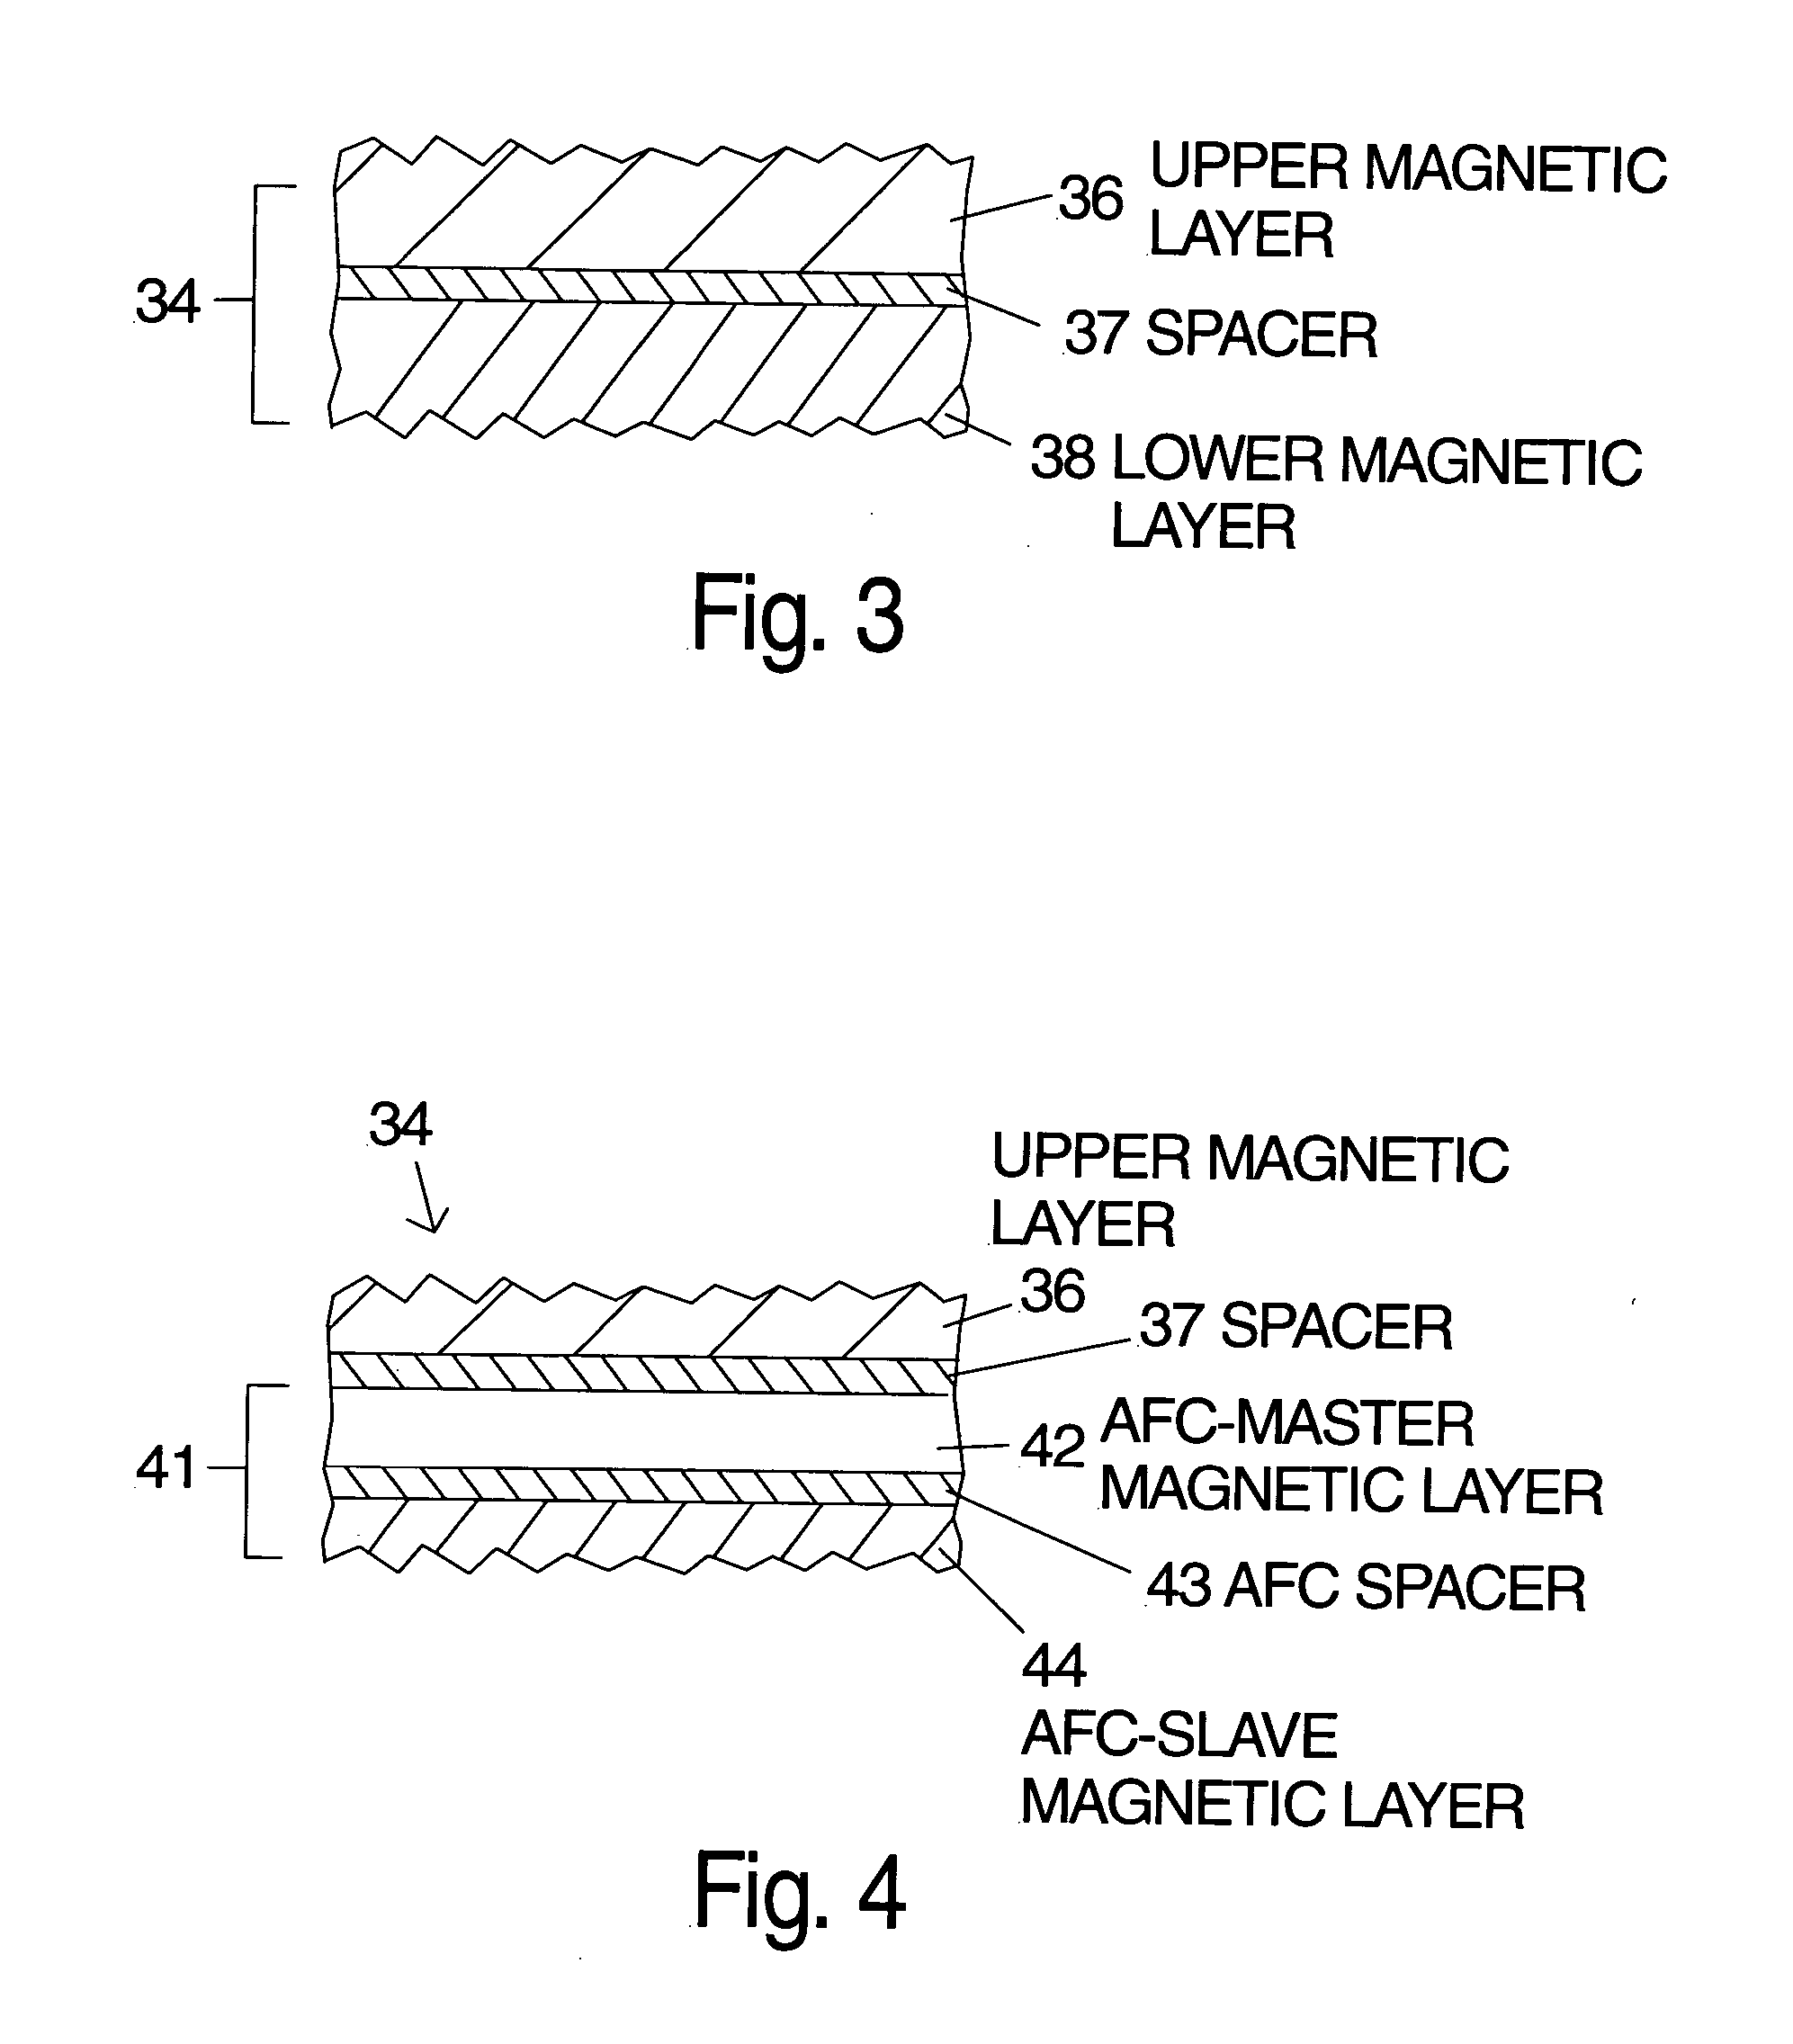 Magnetic anisotropy adjusted laminated magnetic thin films for magnetic recording